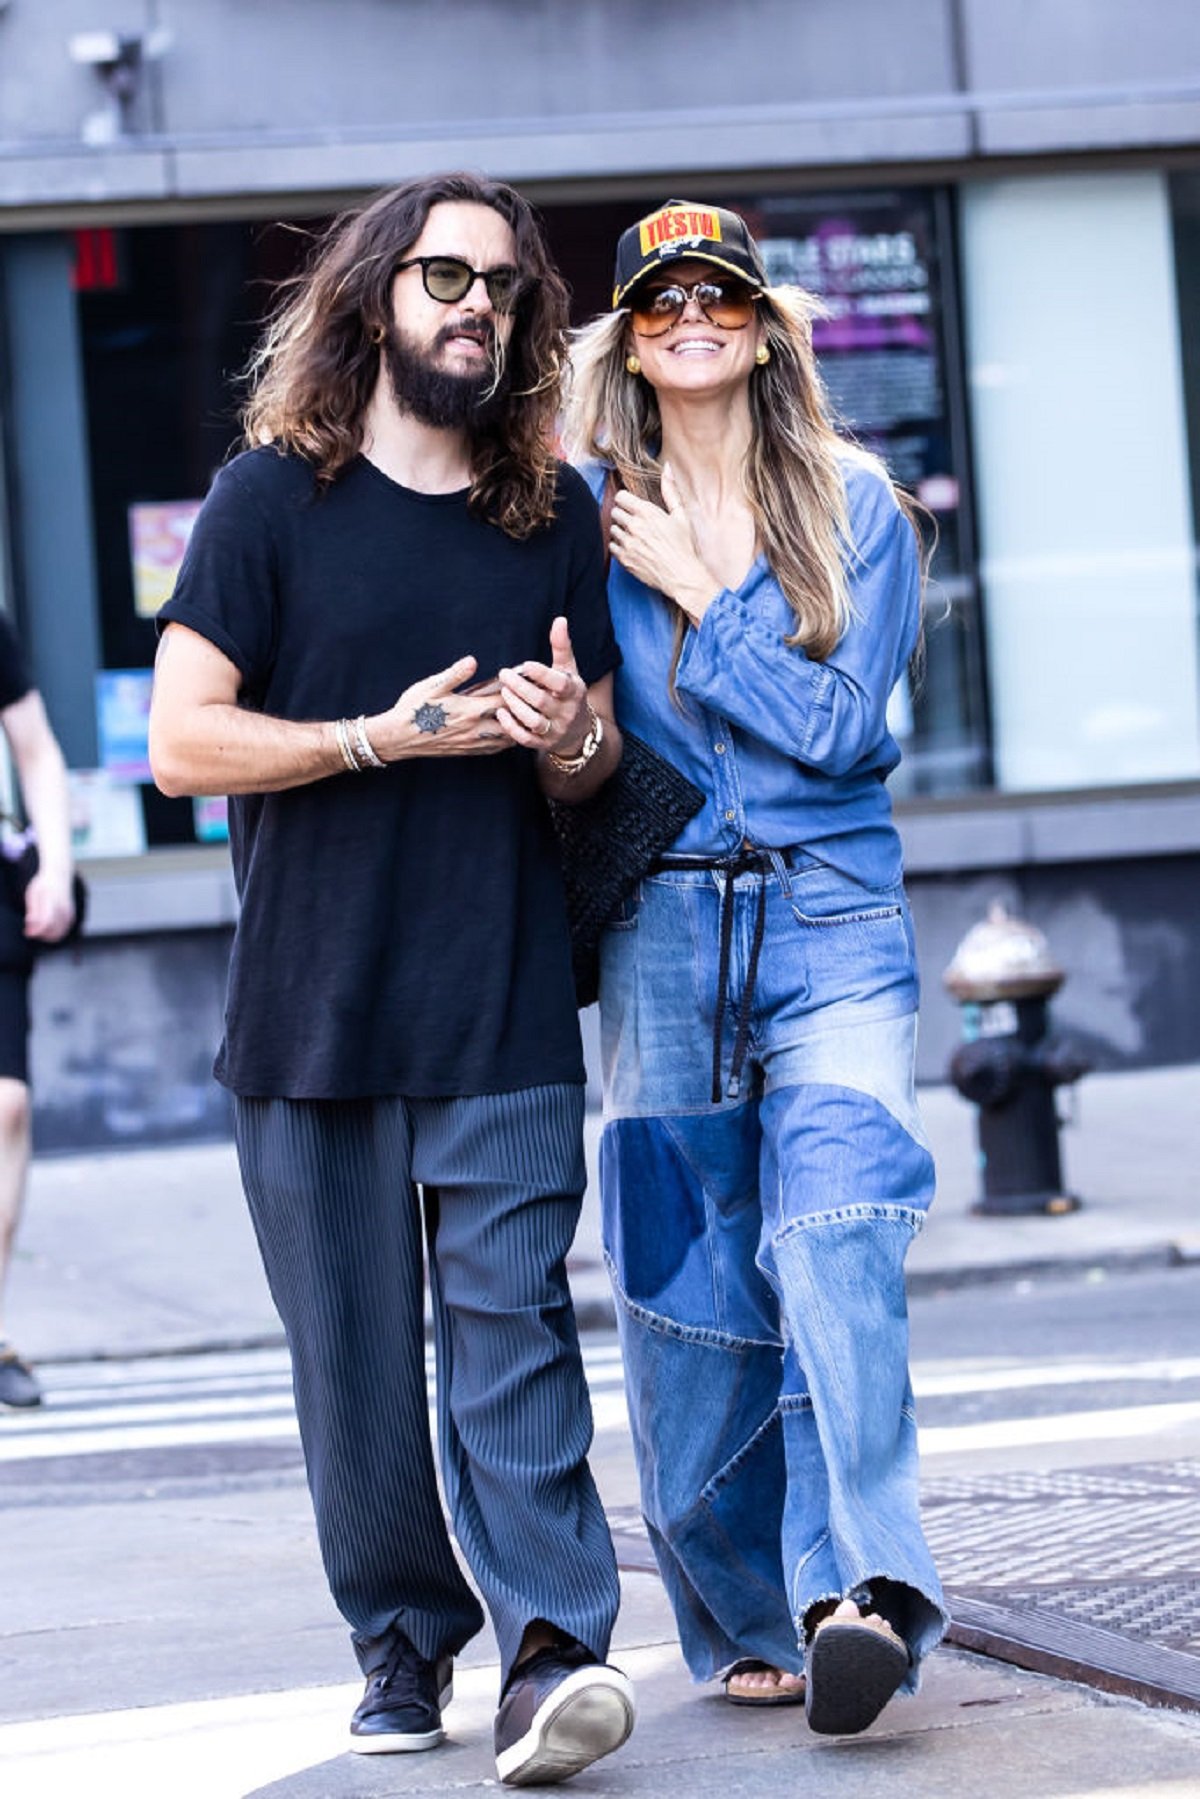 Heidi Klum and Tom Kaulitz smiling while out and about in Soho